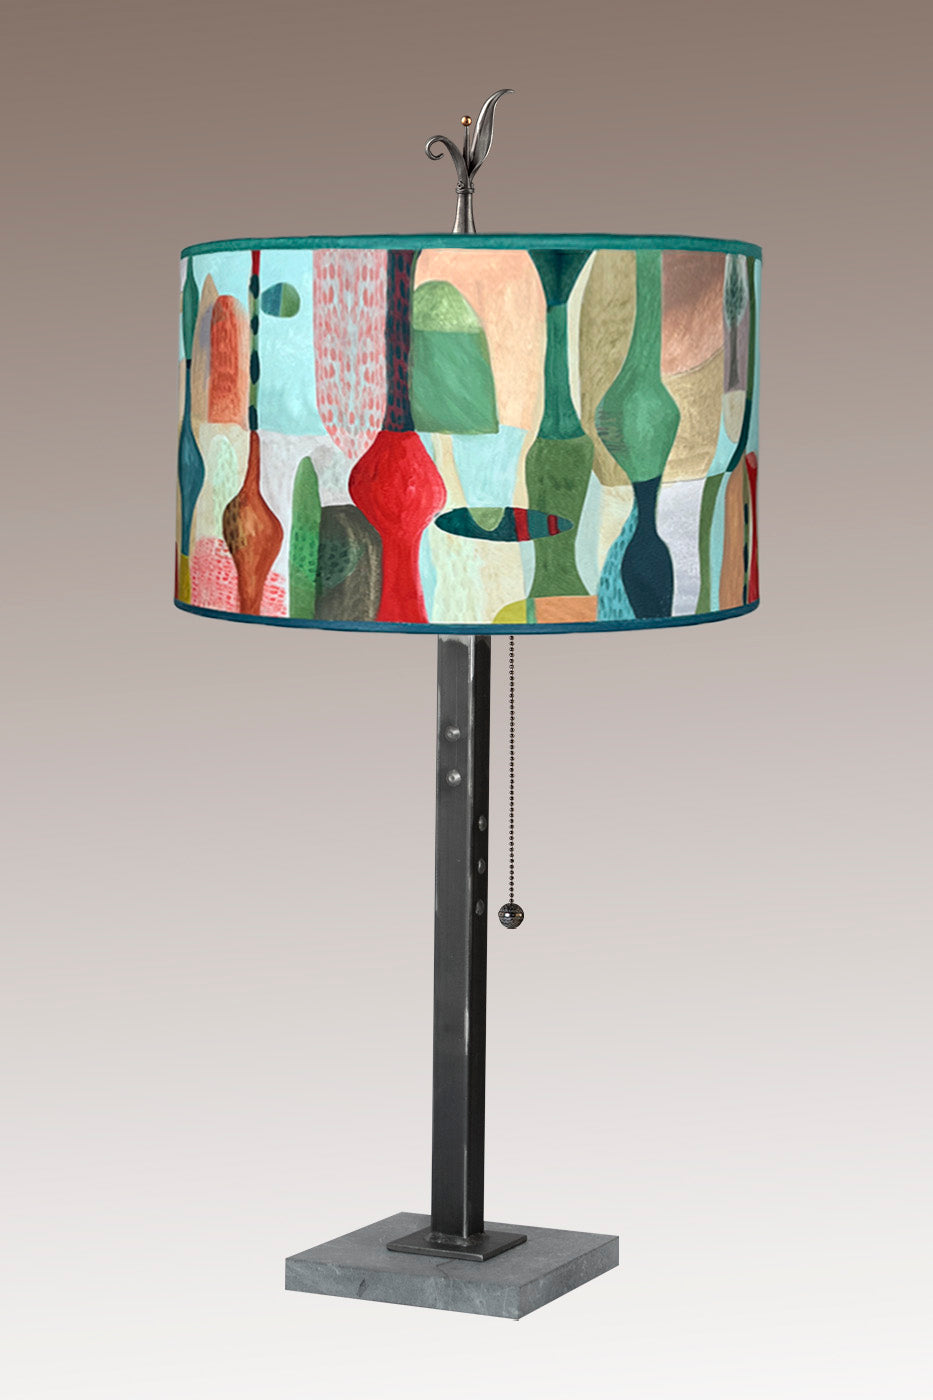 Janna Ugone & Co Table Lamp Steel Table Lamp with Large Drum Shade in Riviera in Poppy